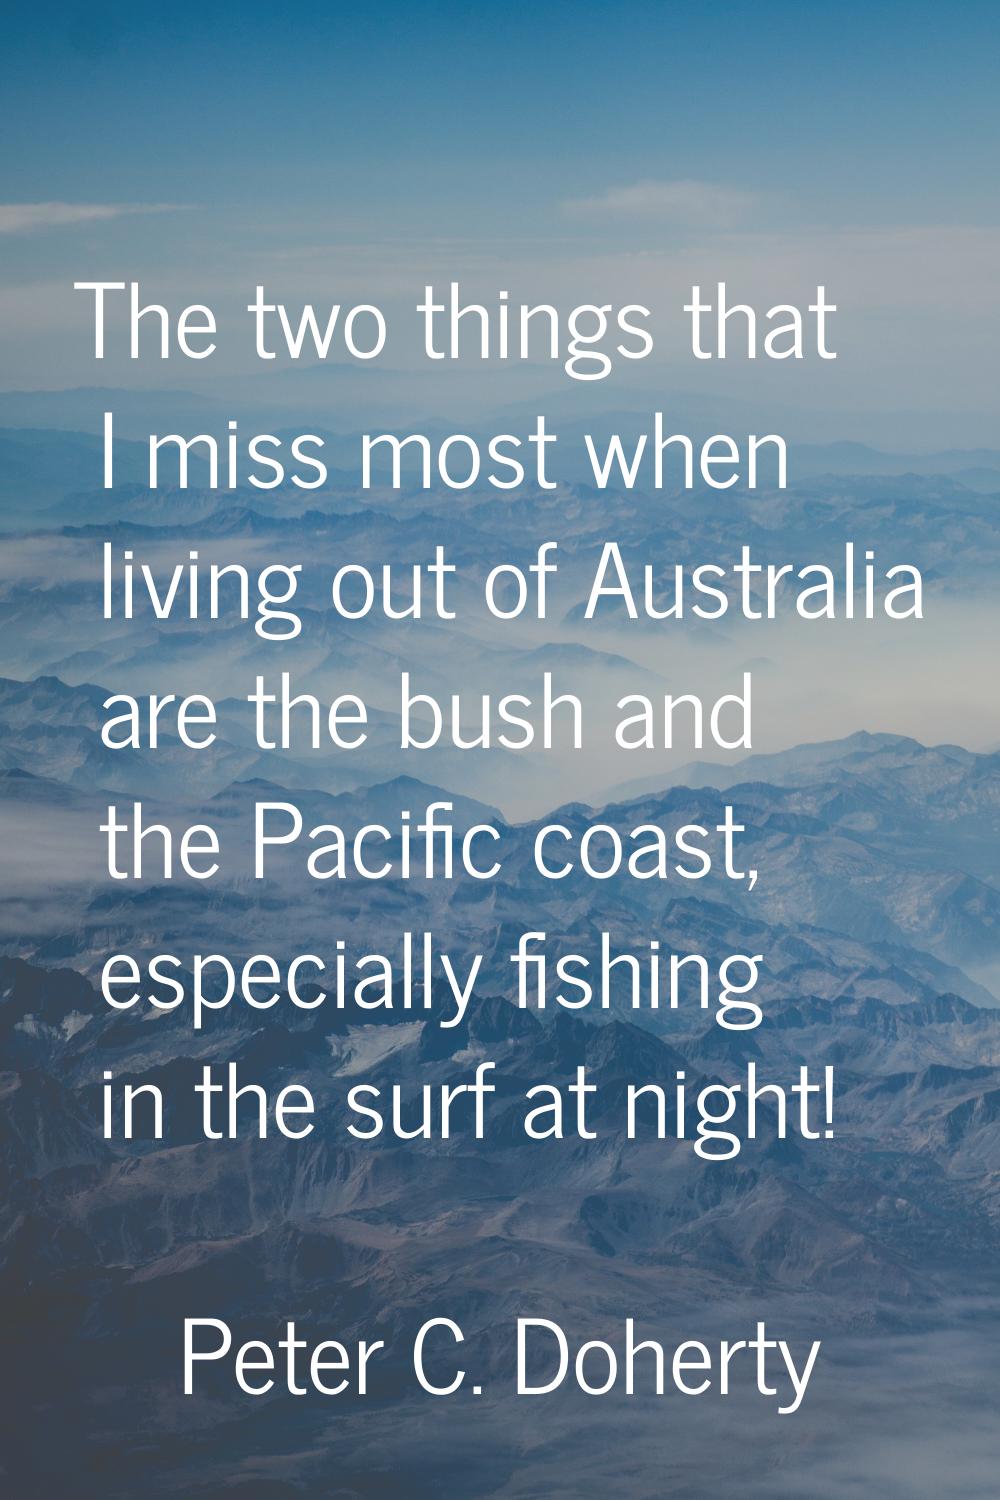 The two things that I miss most when living out of Australia are the bush and the Pacific coast, es